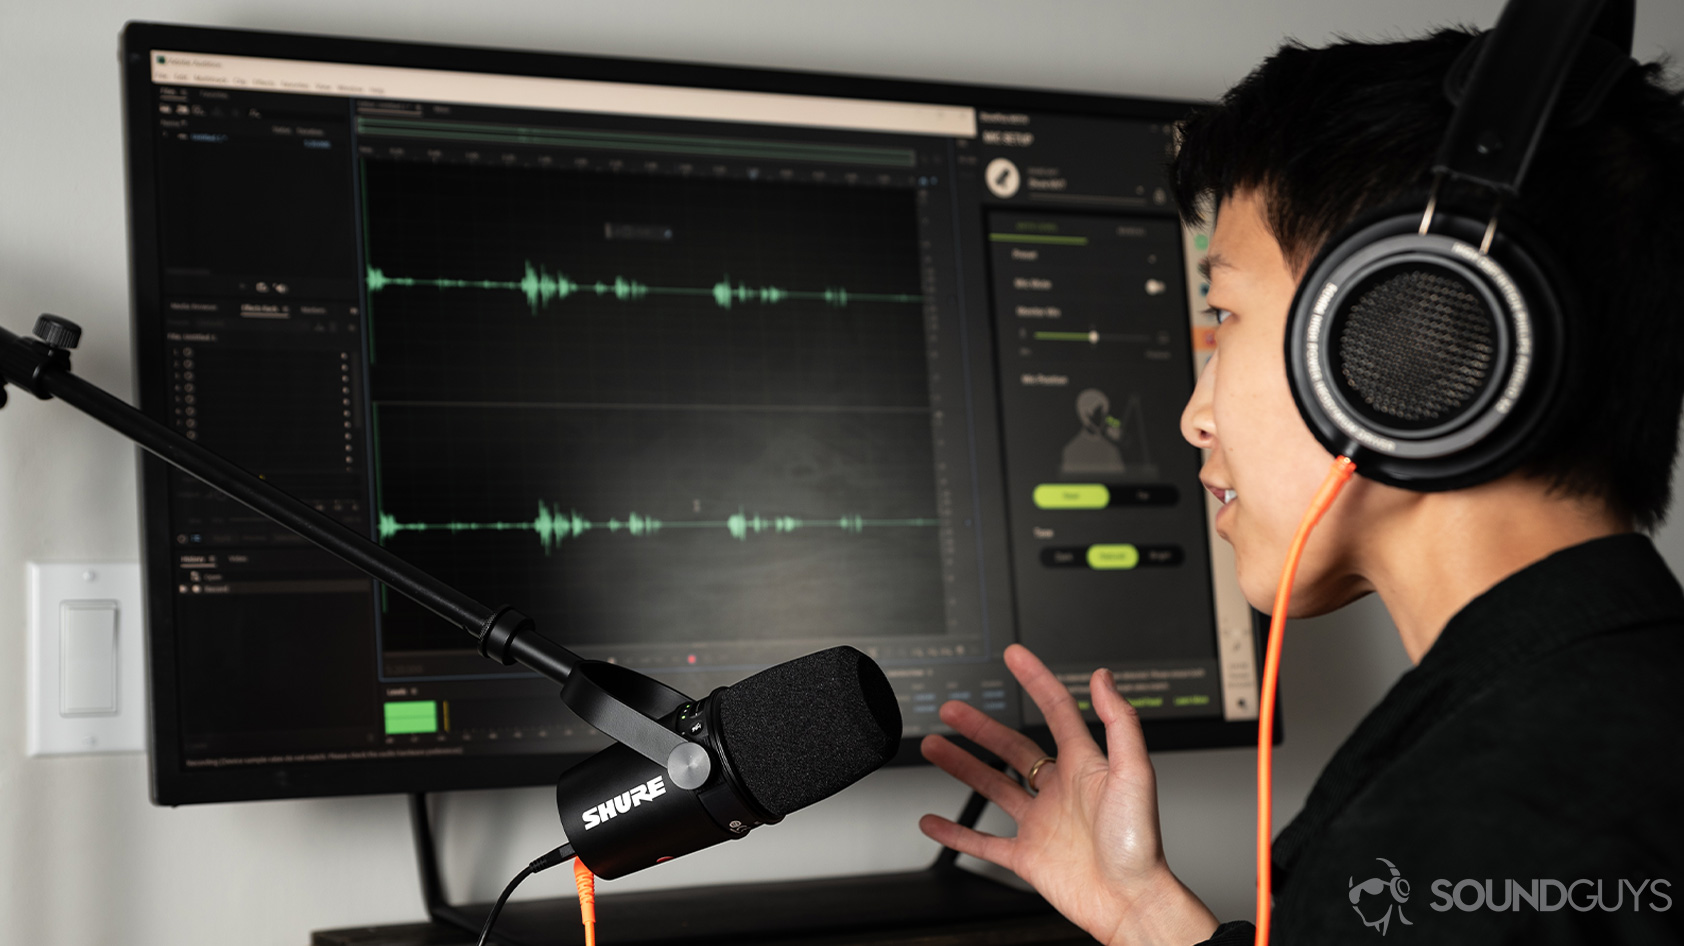 A person speaks into the Shure MV7 USB microphone as it records into Adobe Audition.